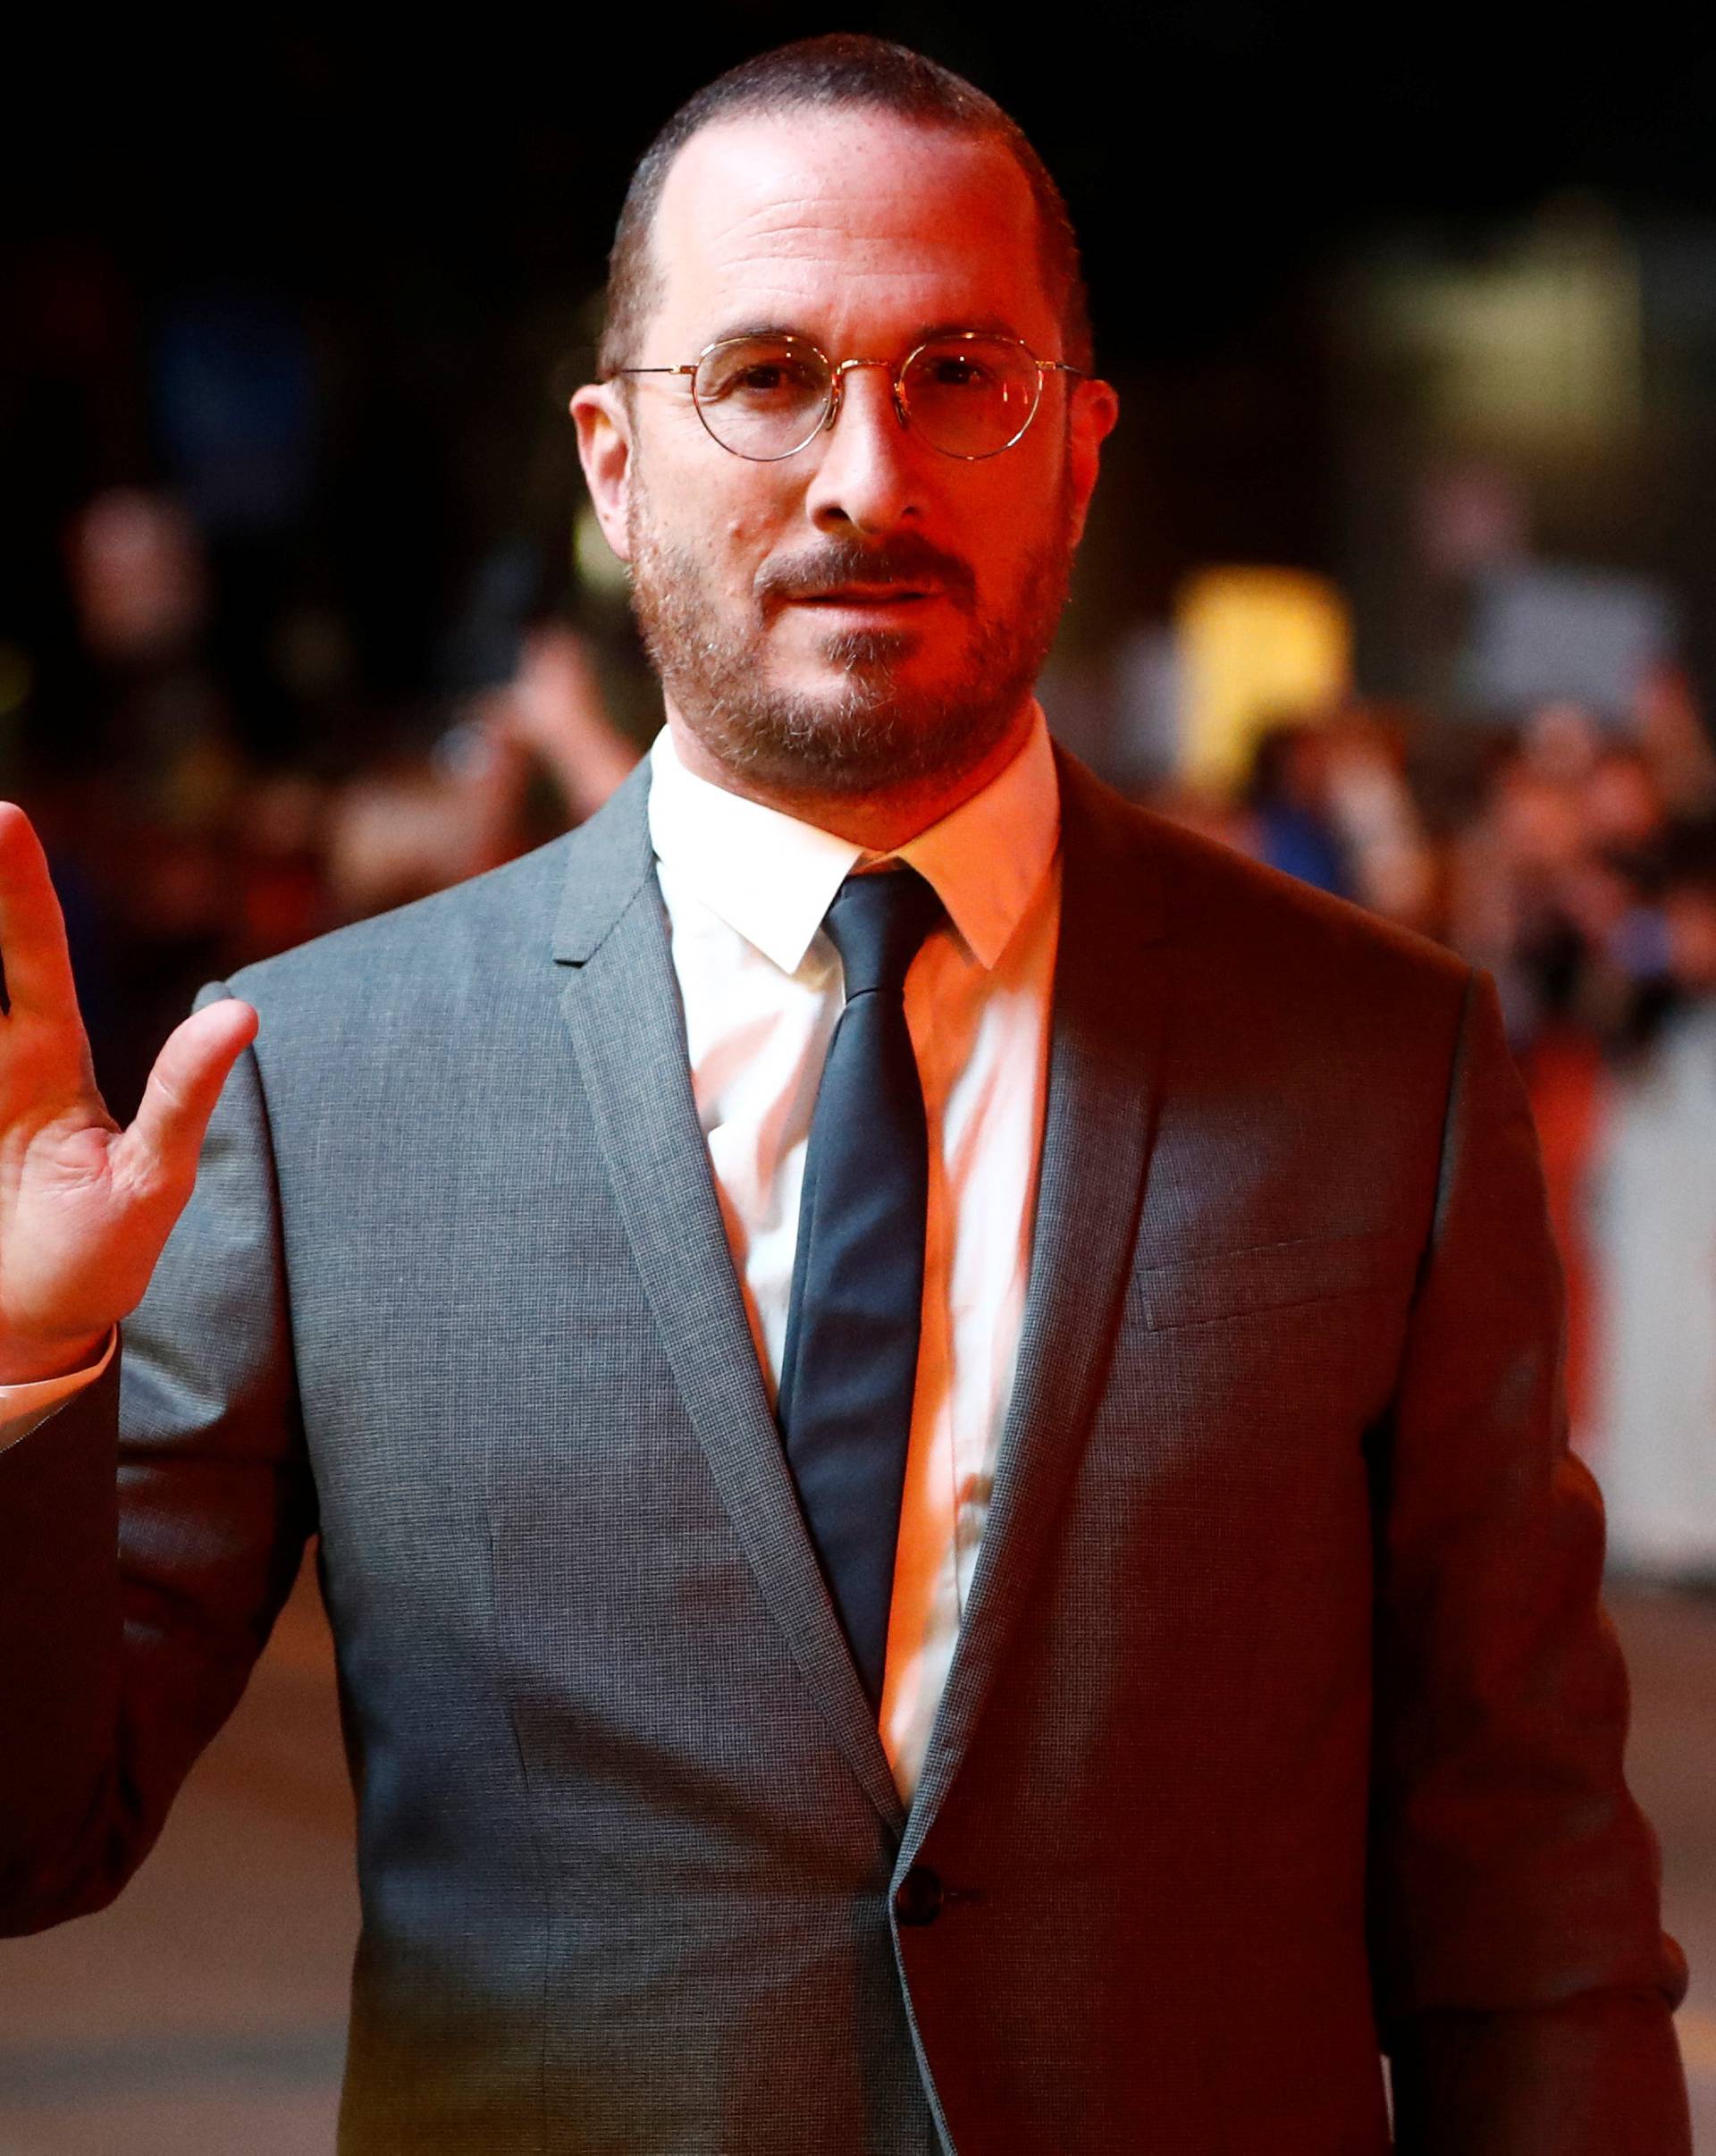 Aronofsky arrives on the red carpet for the film "Mother!" during the Toronto International Film Festival in Toronto